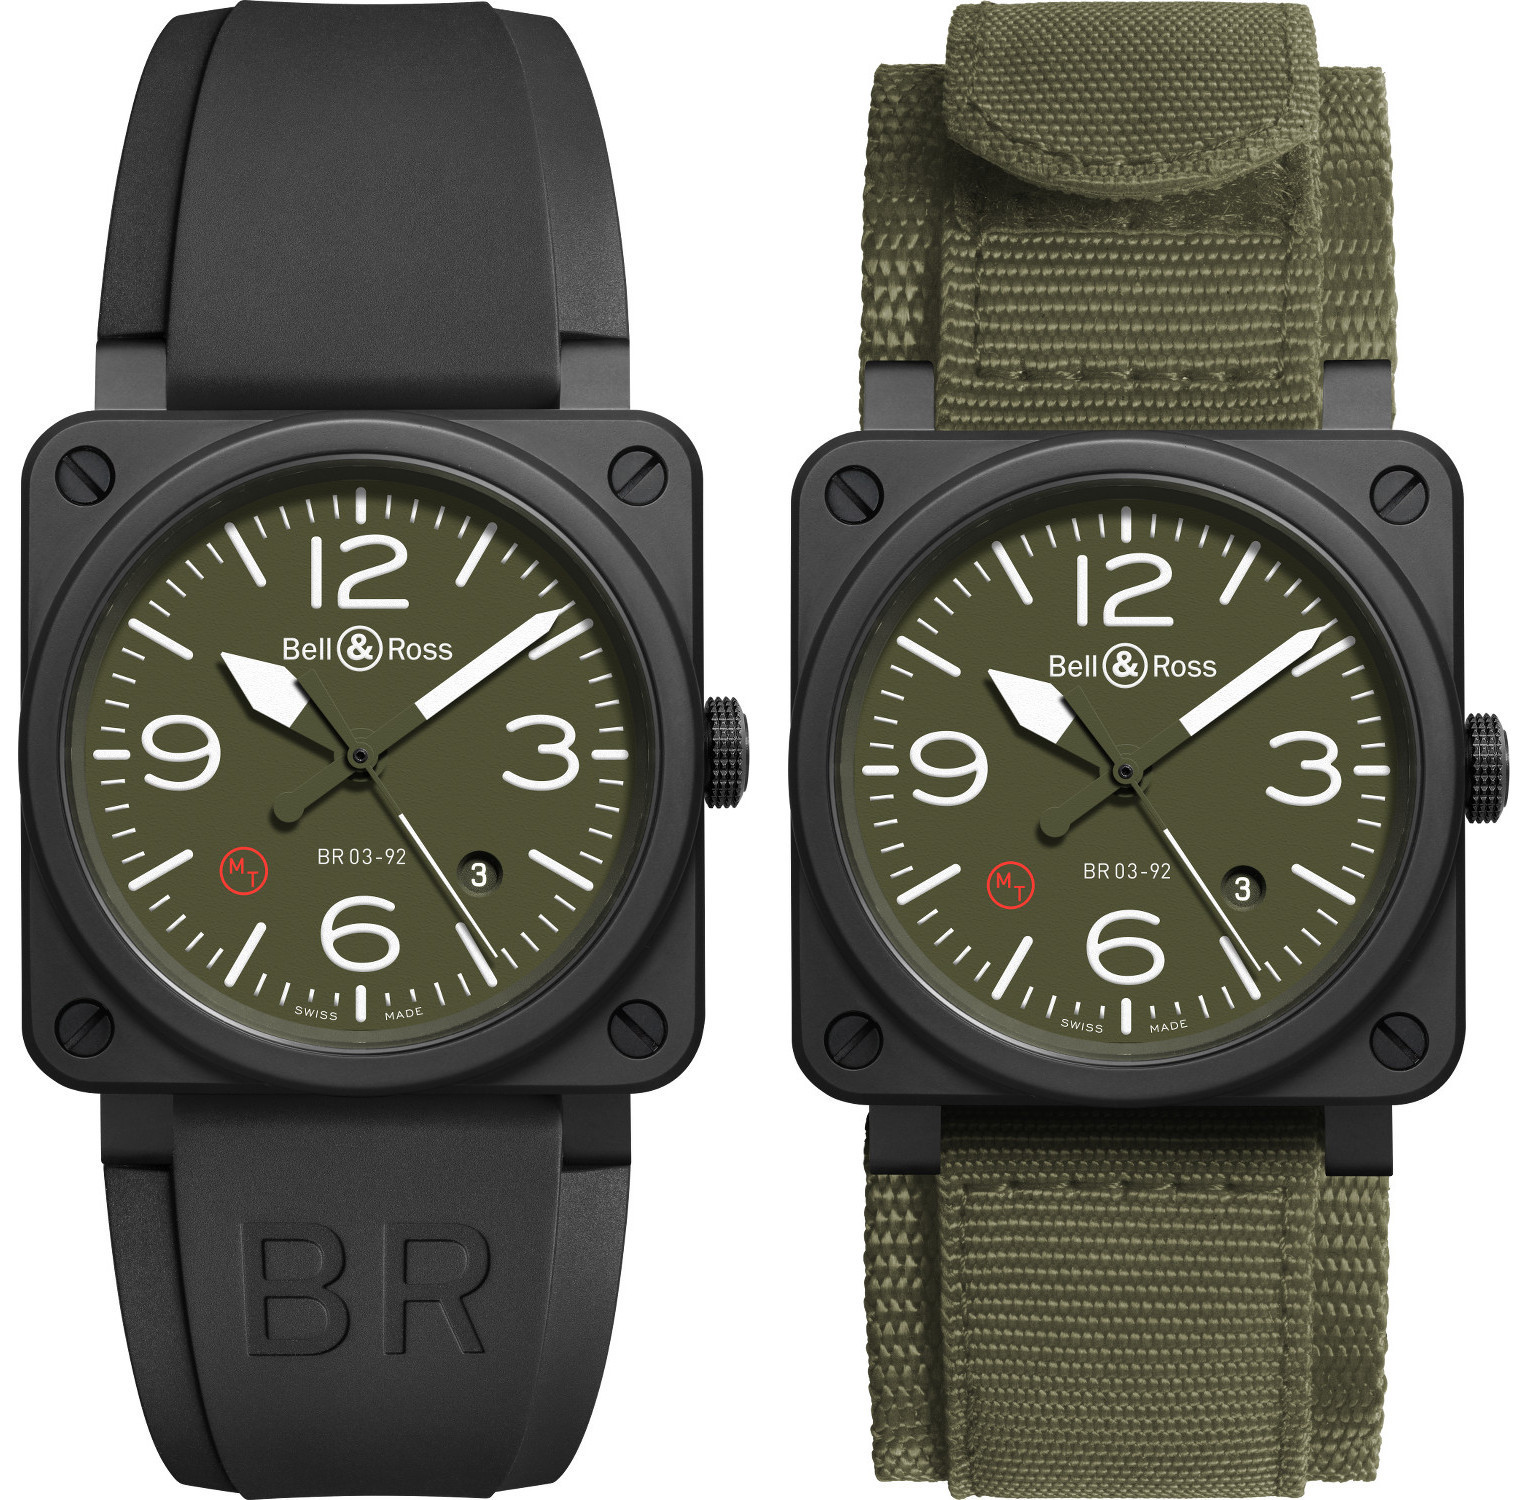 Pre Basel 2015 – The Bell and Ross BR03-92 Military Type